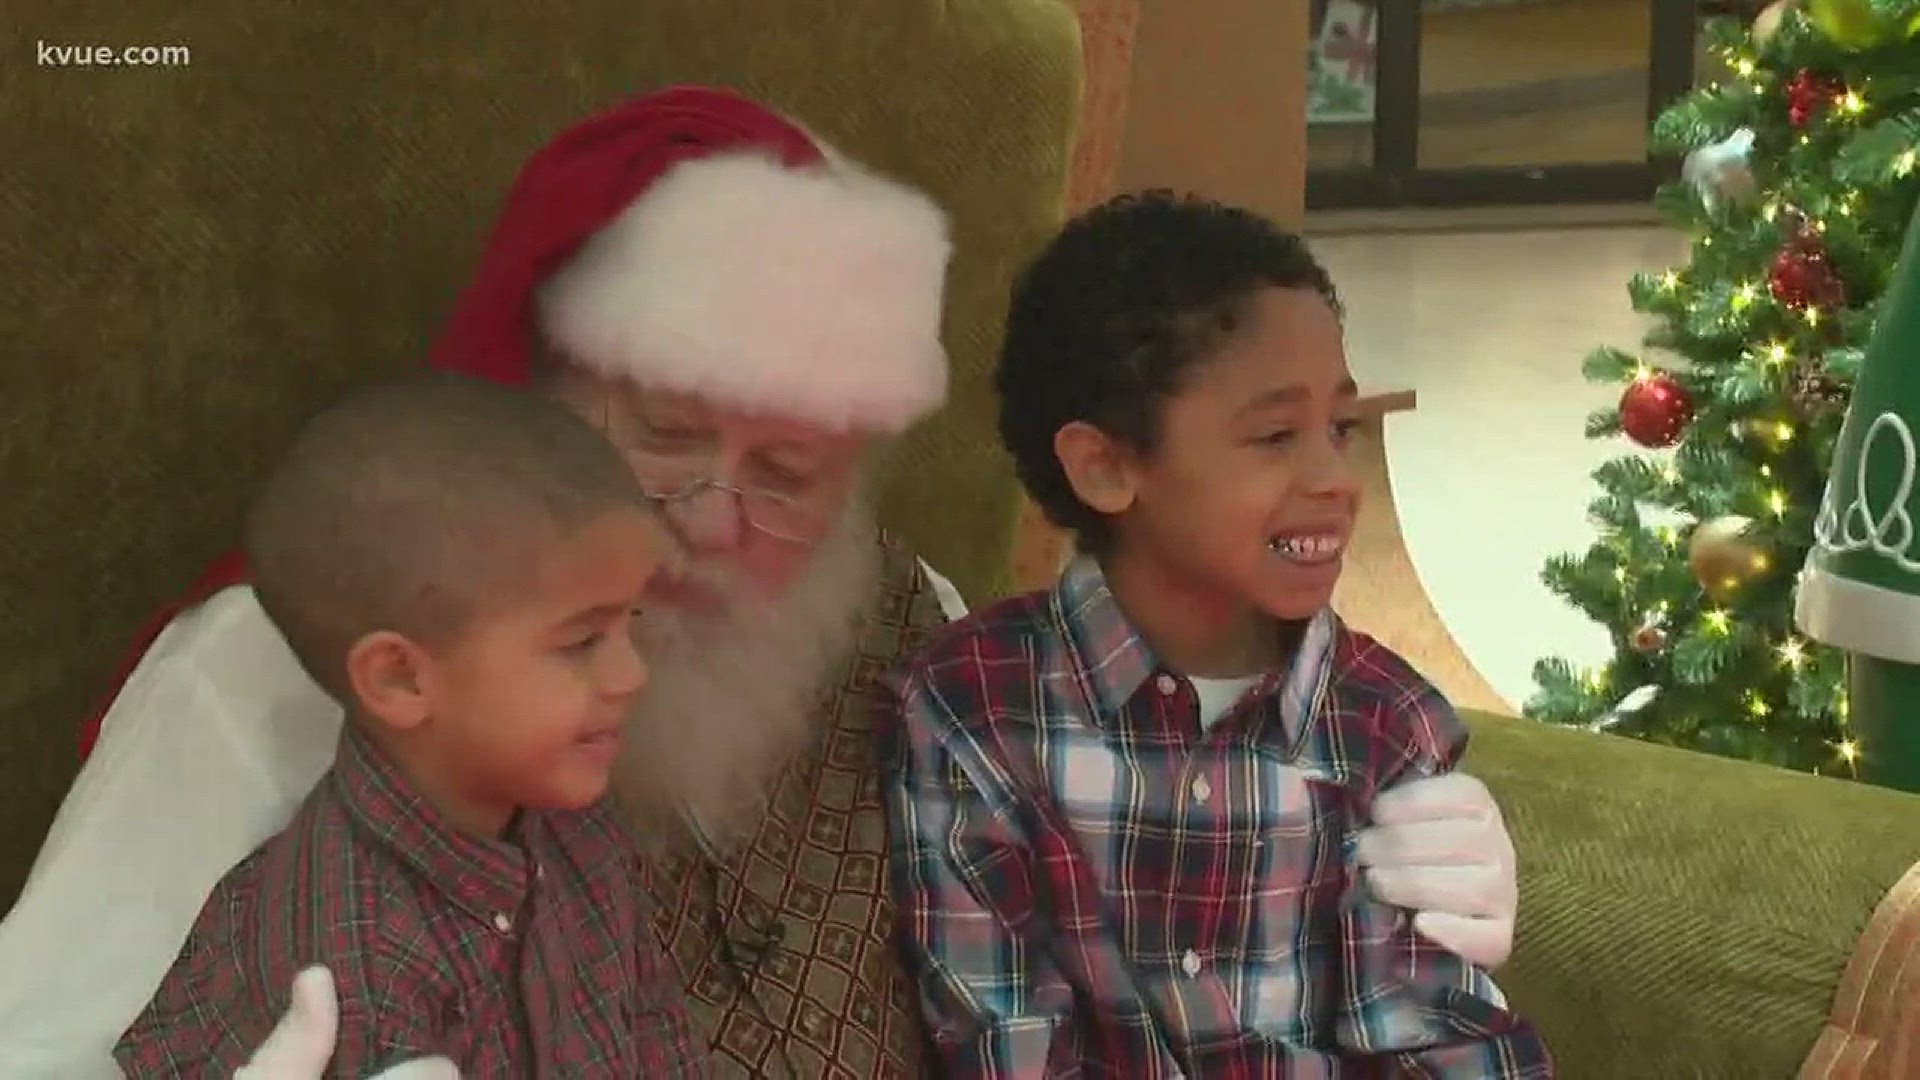 Special needs families know first hand just how challenging Santa experiences can be.